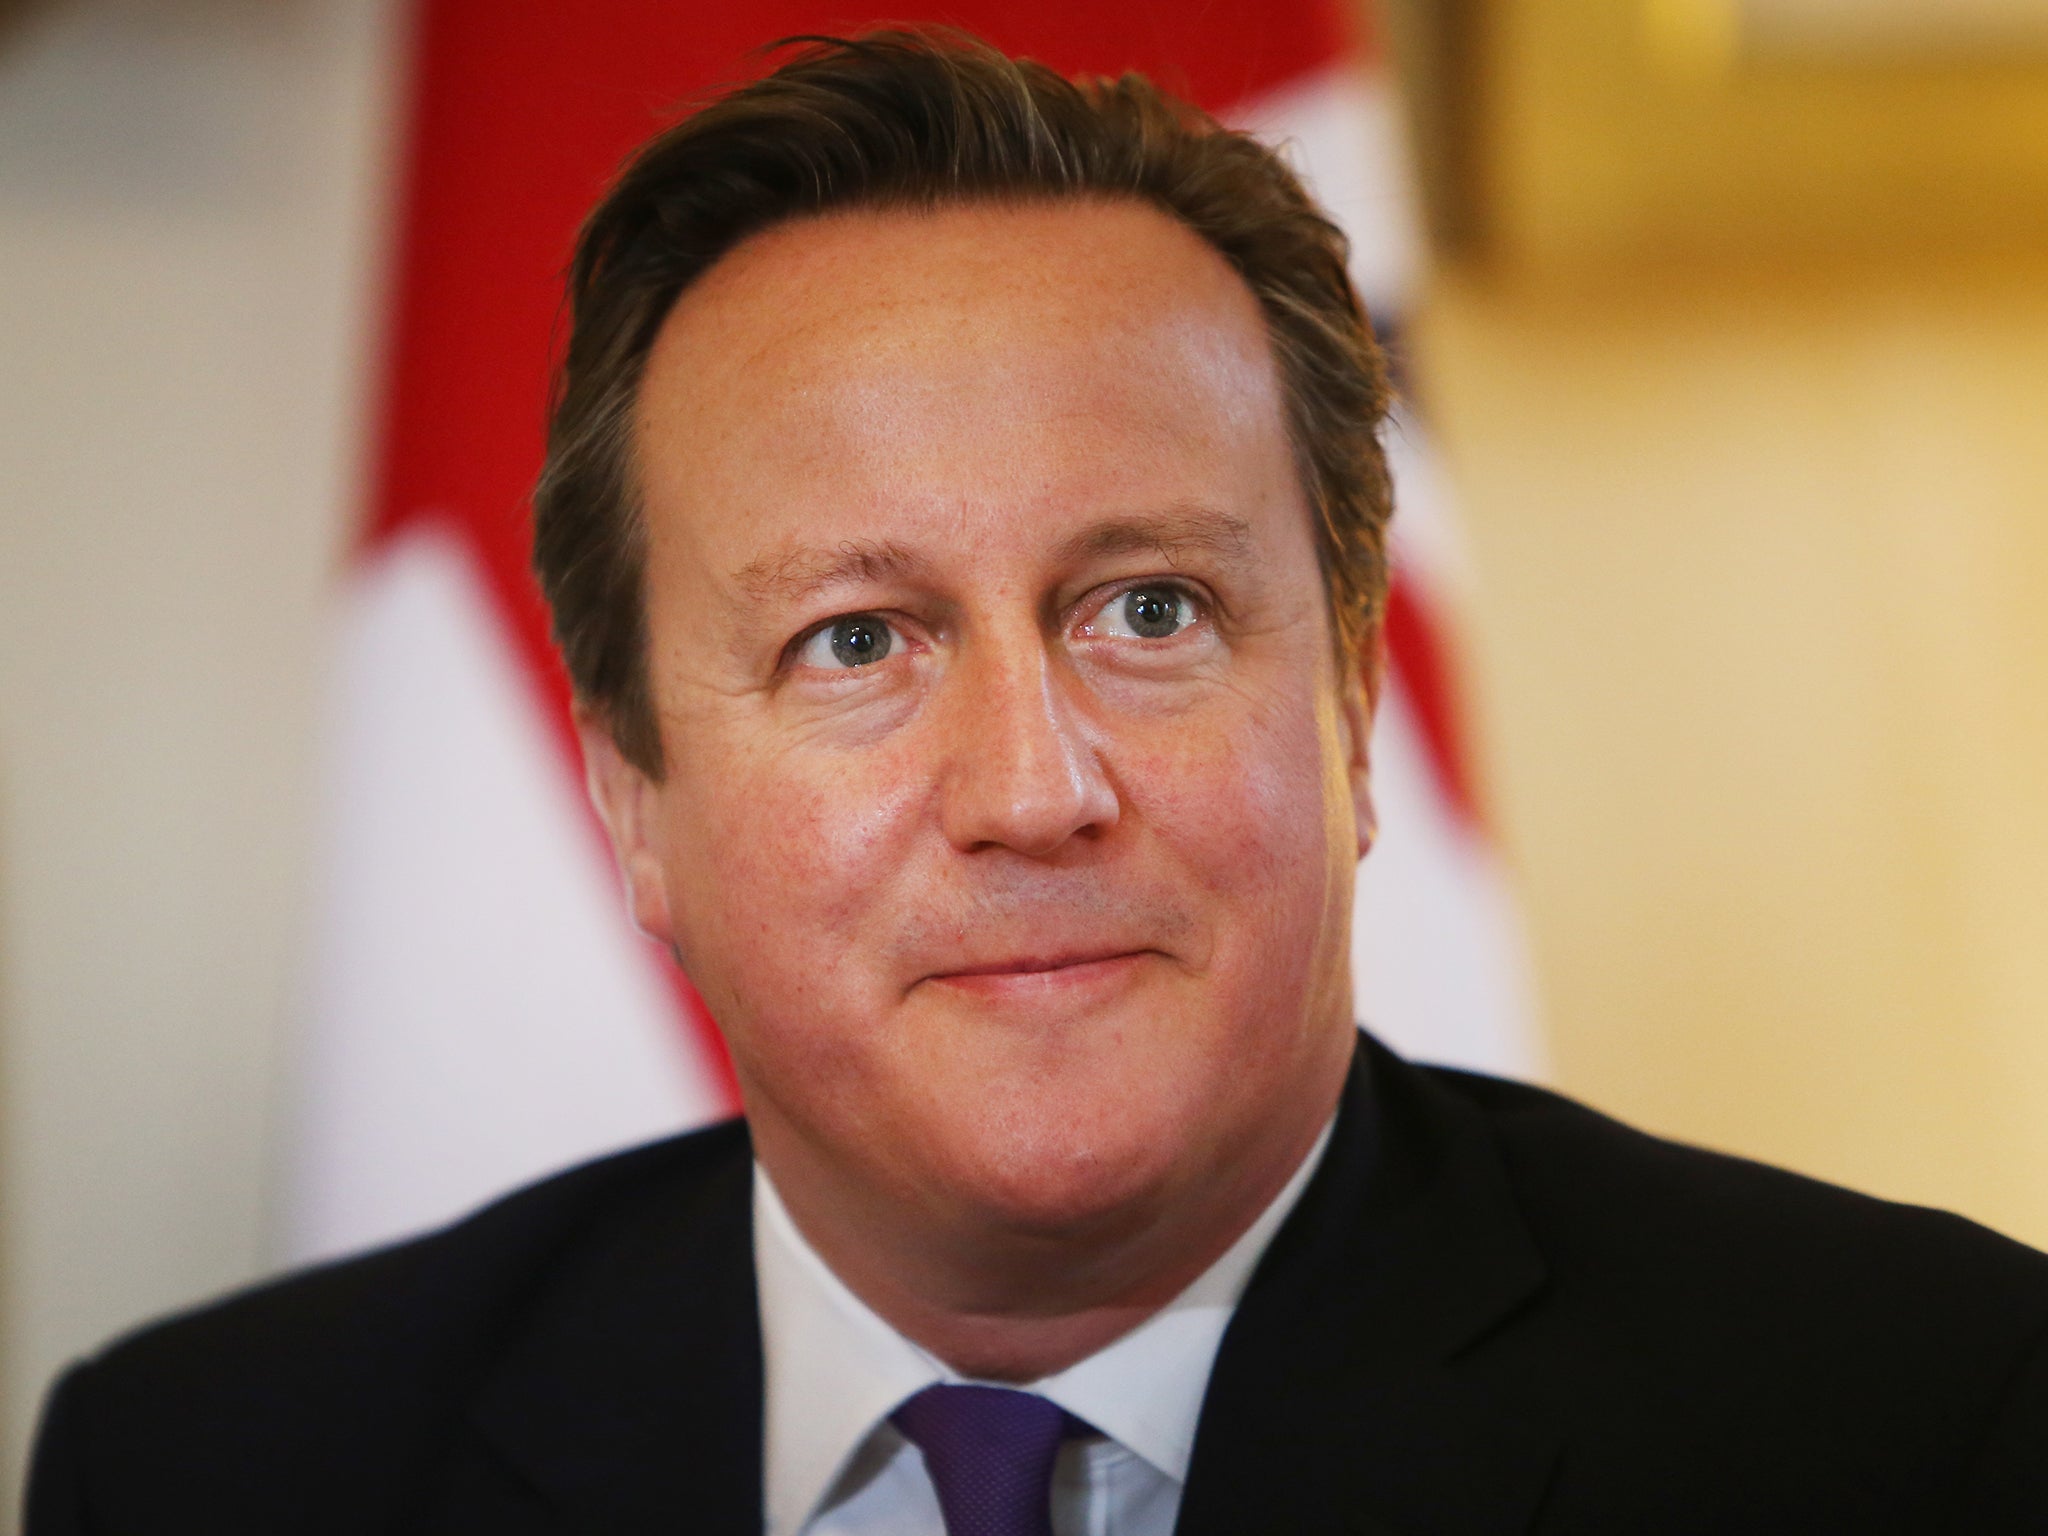 European opinion is moving against once-sacred tenets of the EU – and in David Cameron's favour